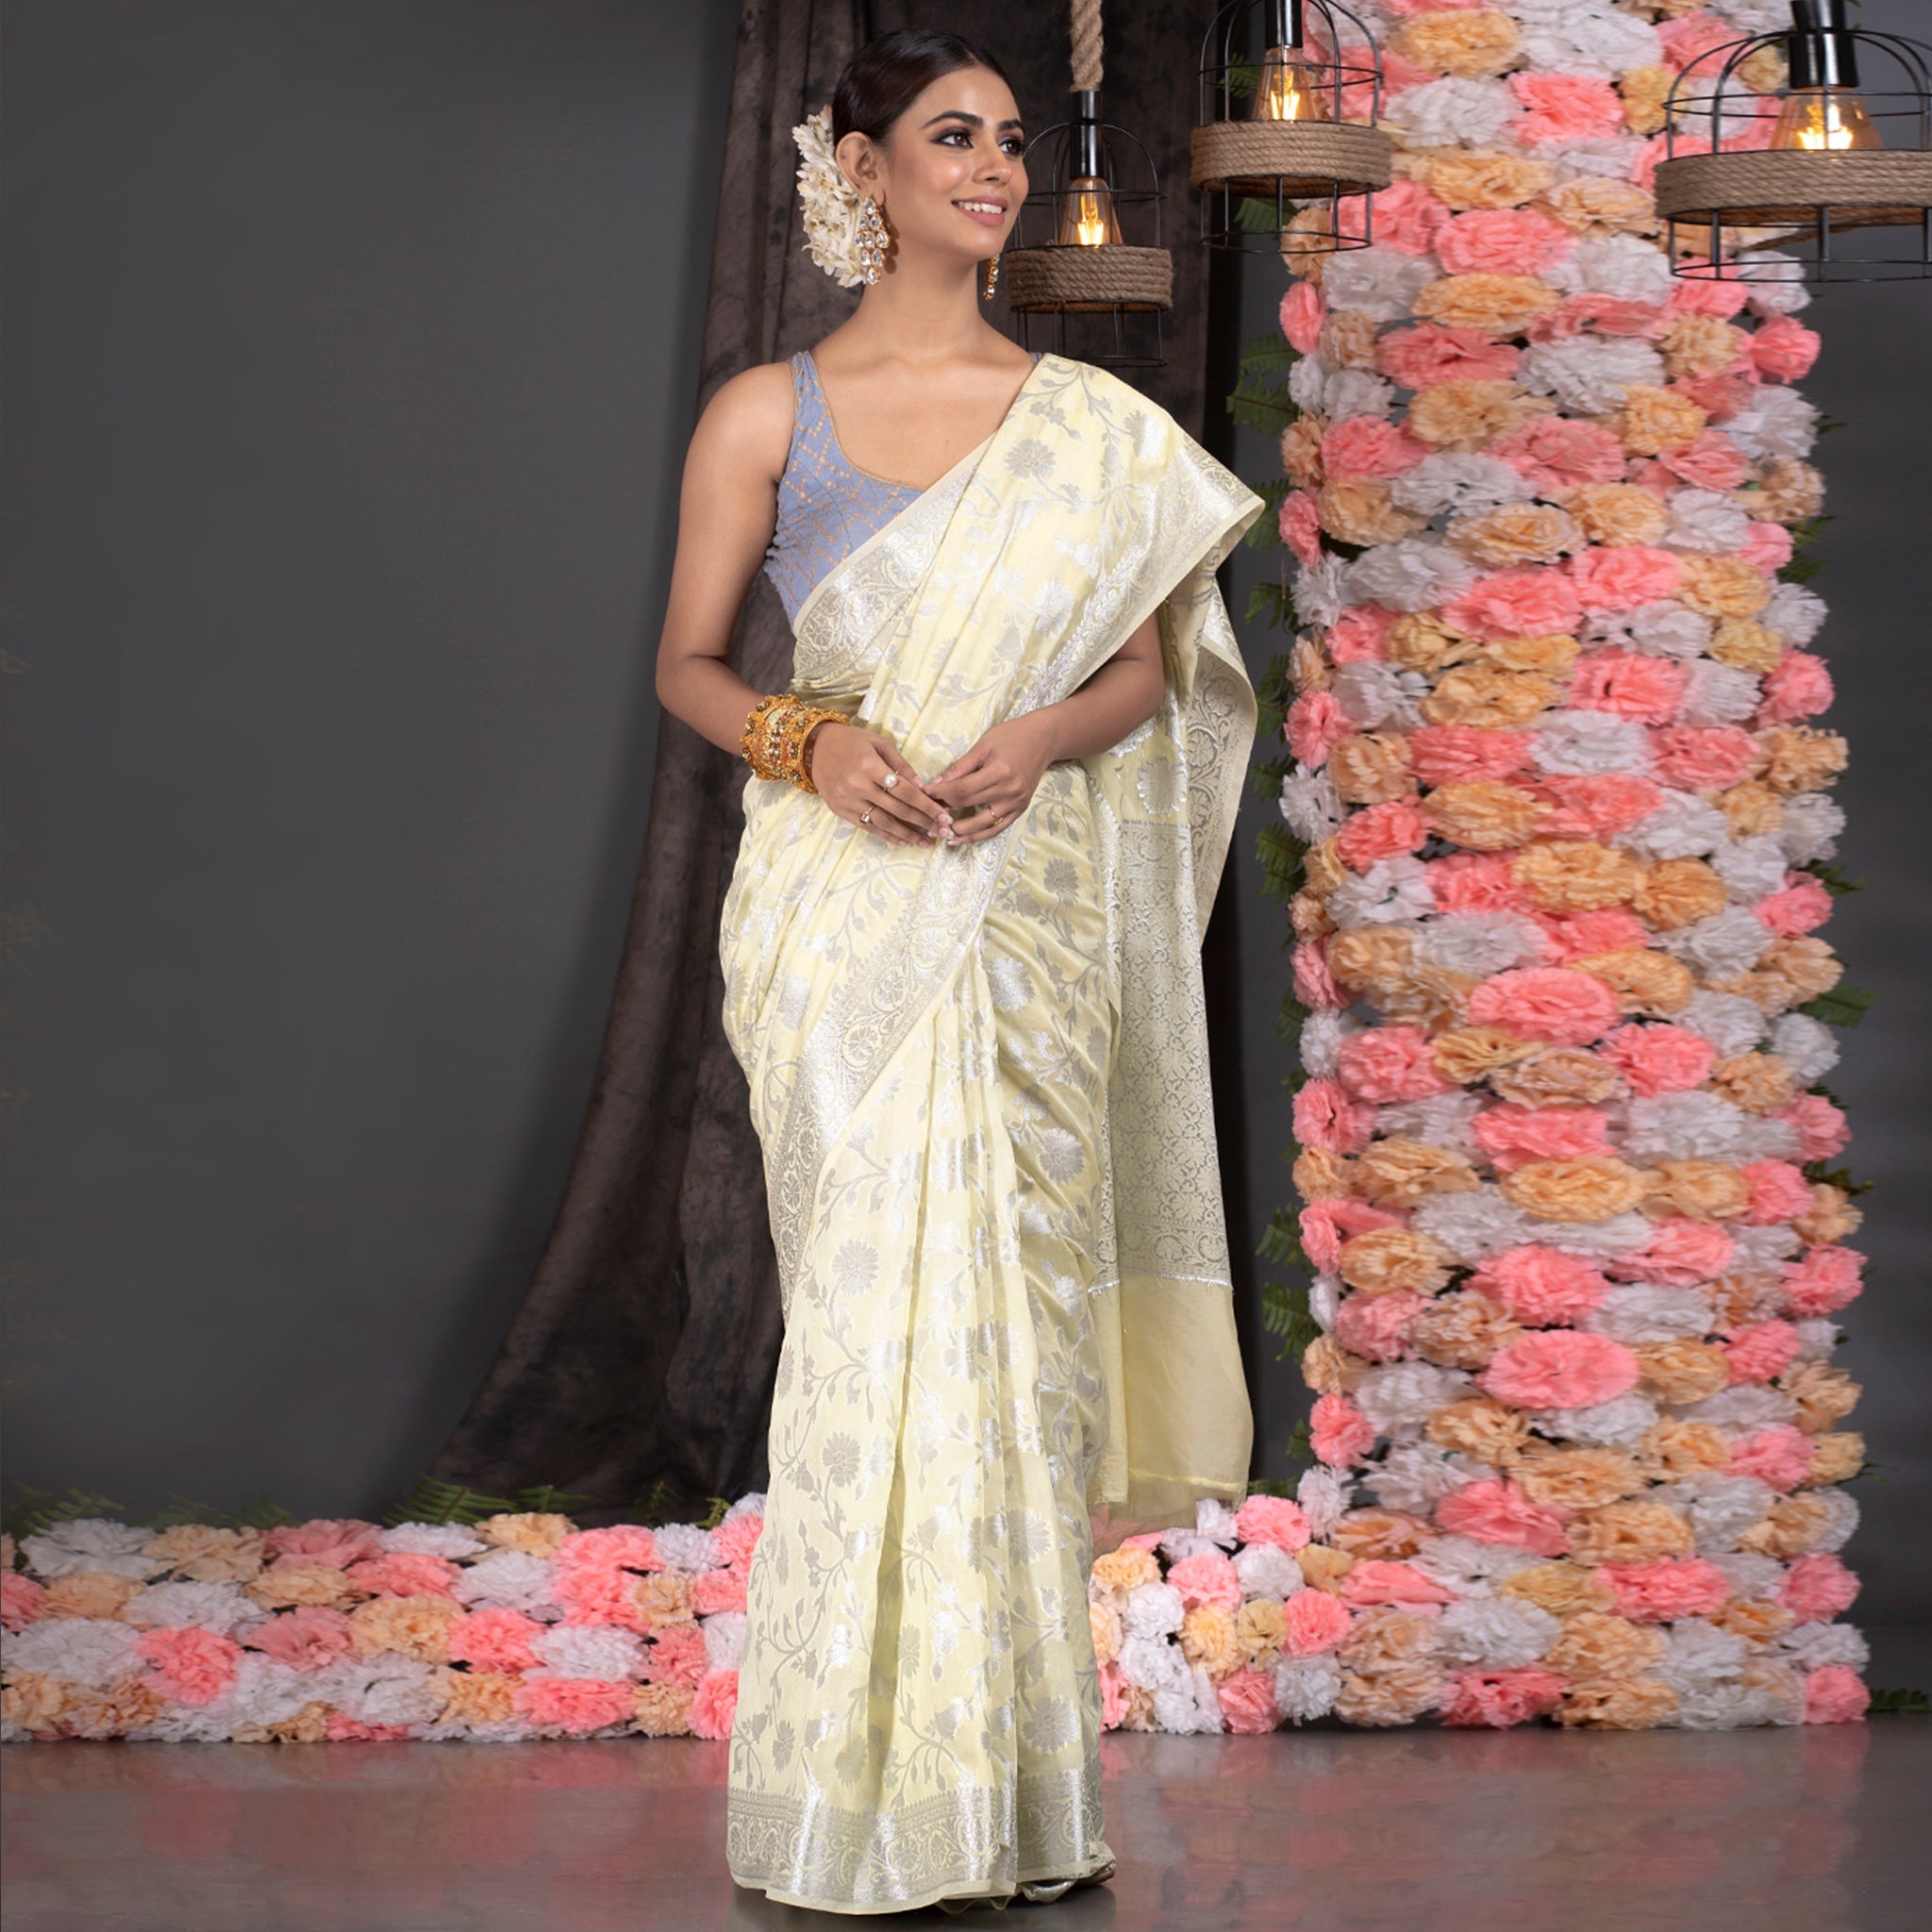 Women's Lemon Yellow Pure Georgette Saree With Antique Silver Jaal Border And Pallu - Boveee